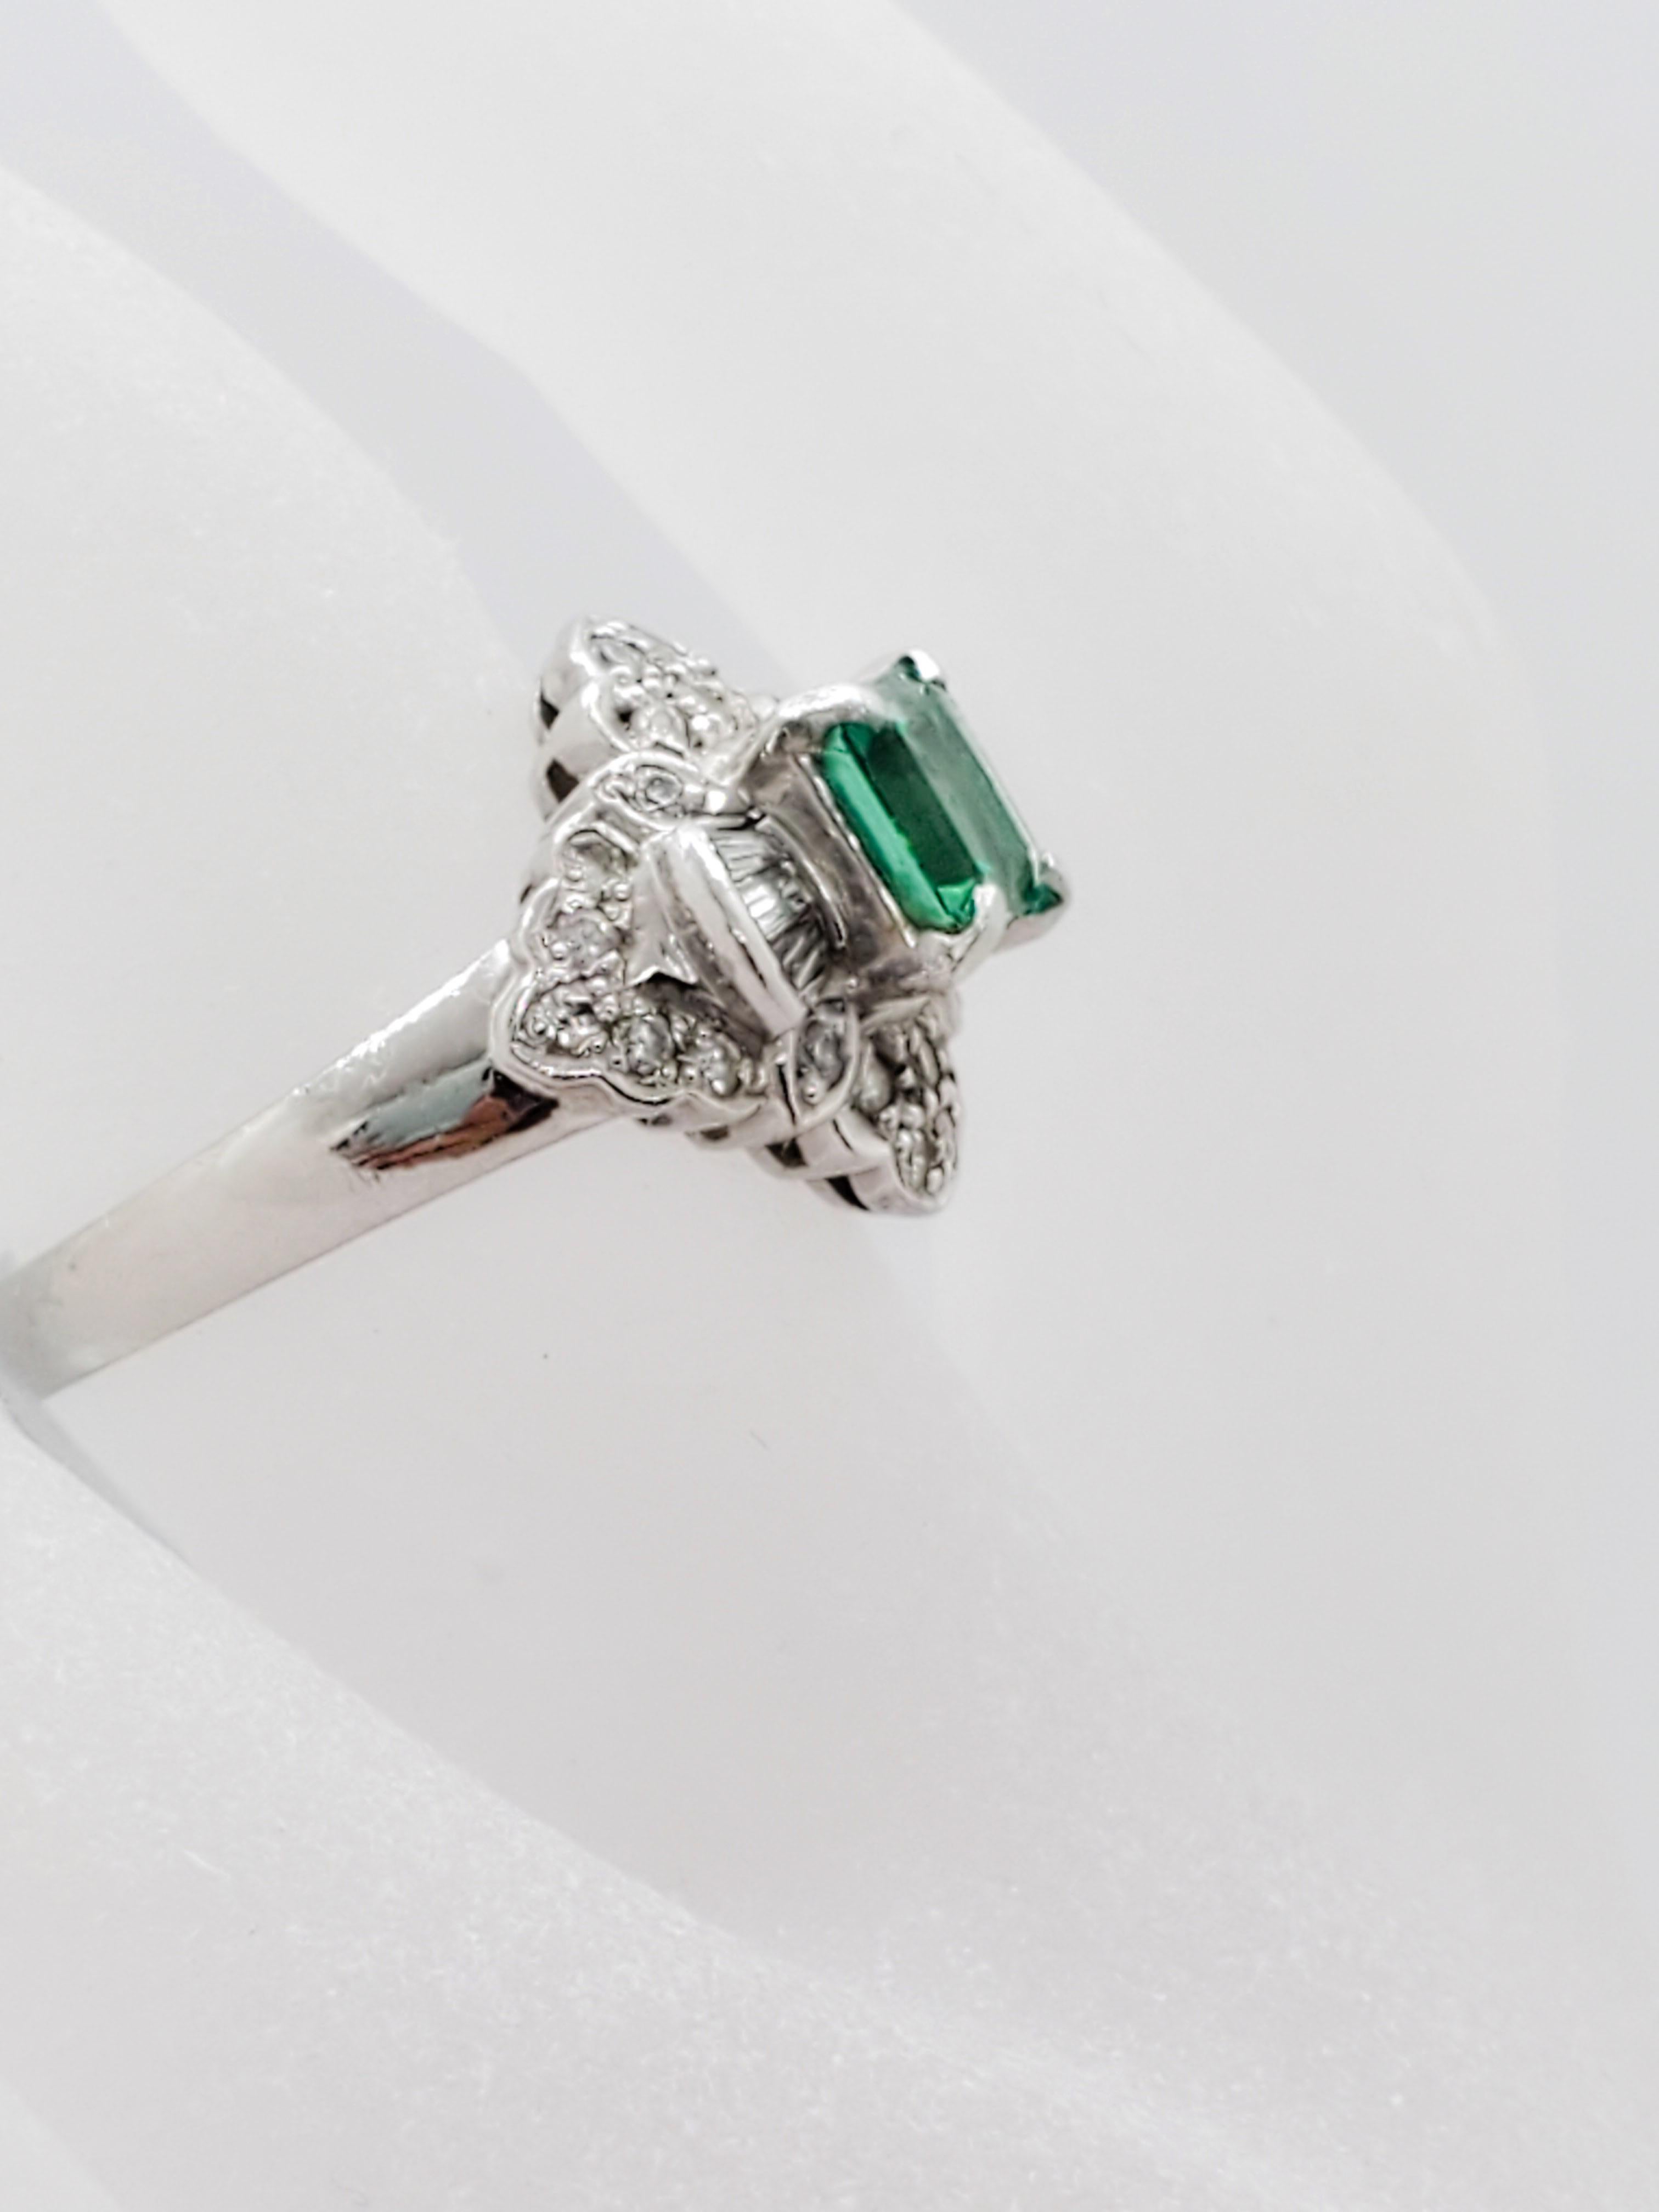 Elegant estate 0.75 ct emerald square with 0.46 ct white diamond baguettes and rounds.  Handcrafted in a platinum mounting.  Ring size 5.5.